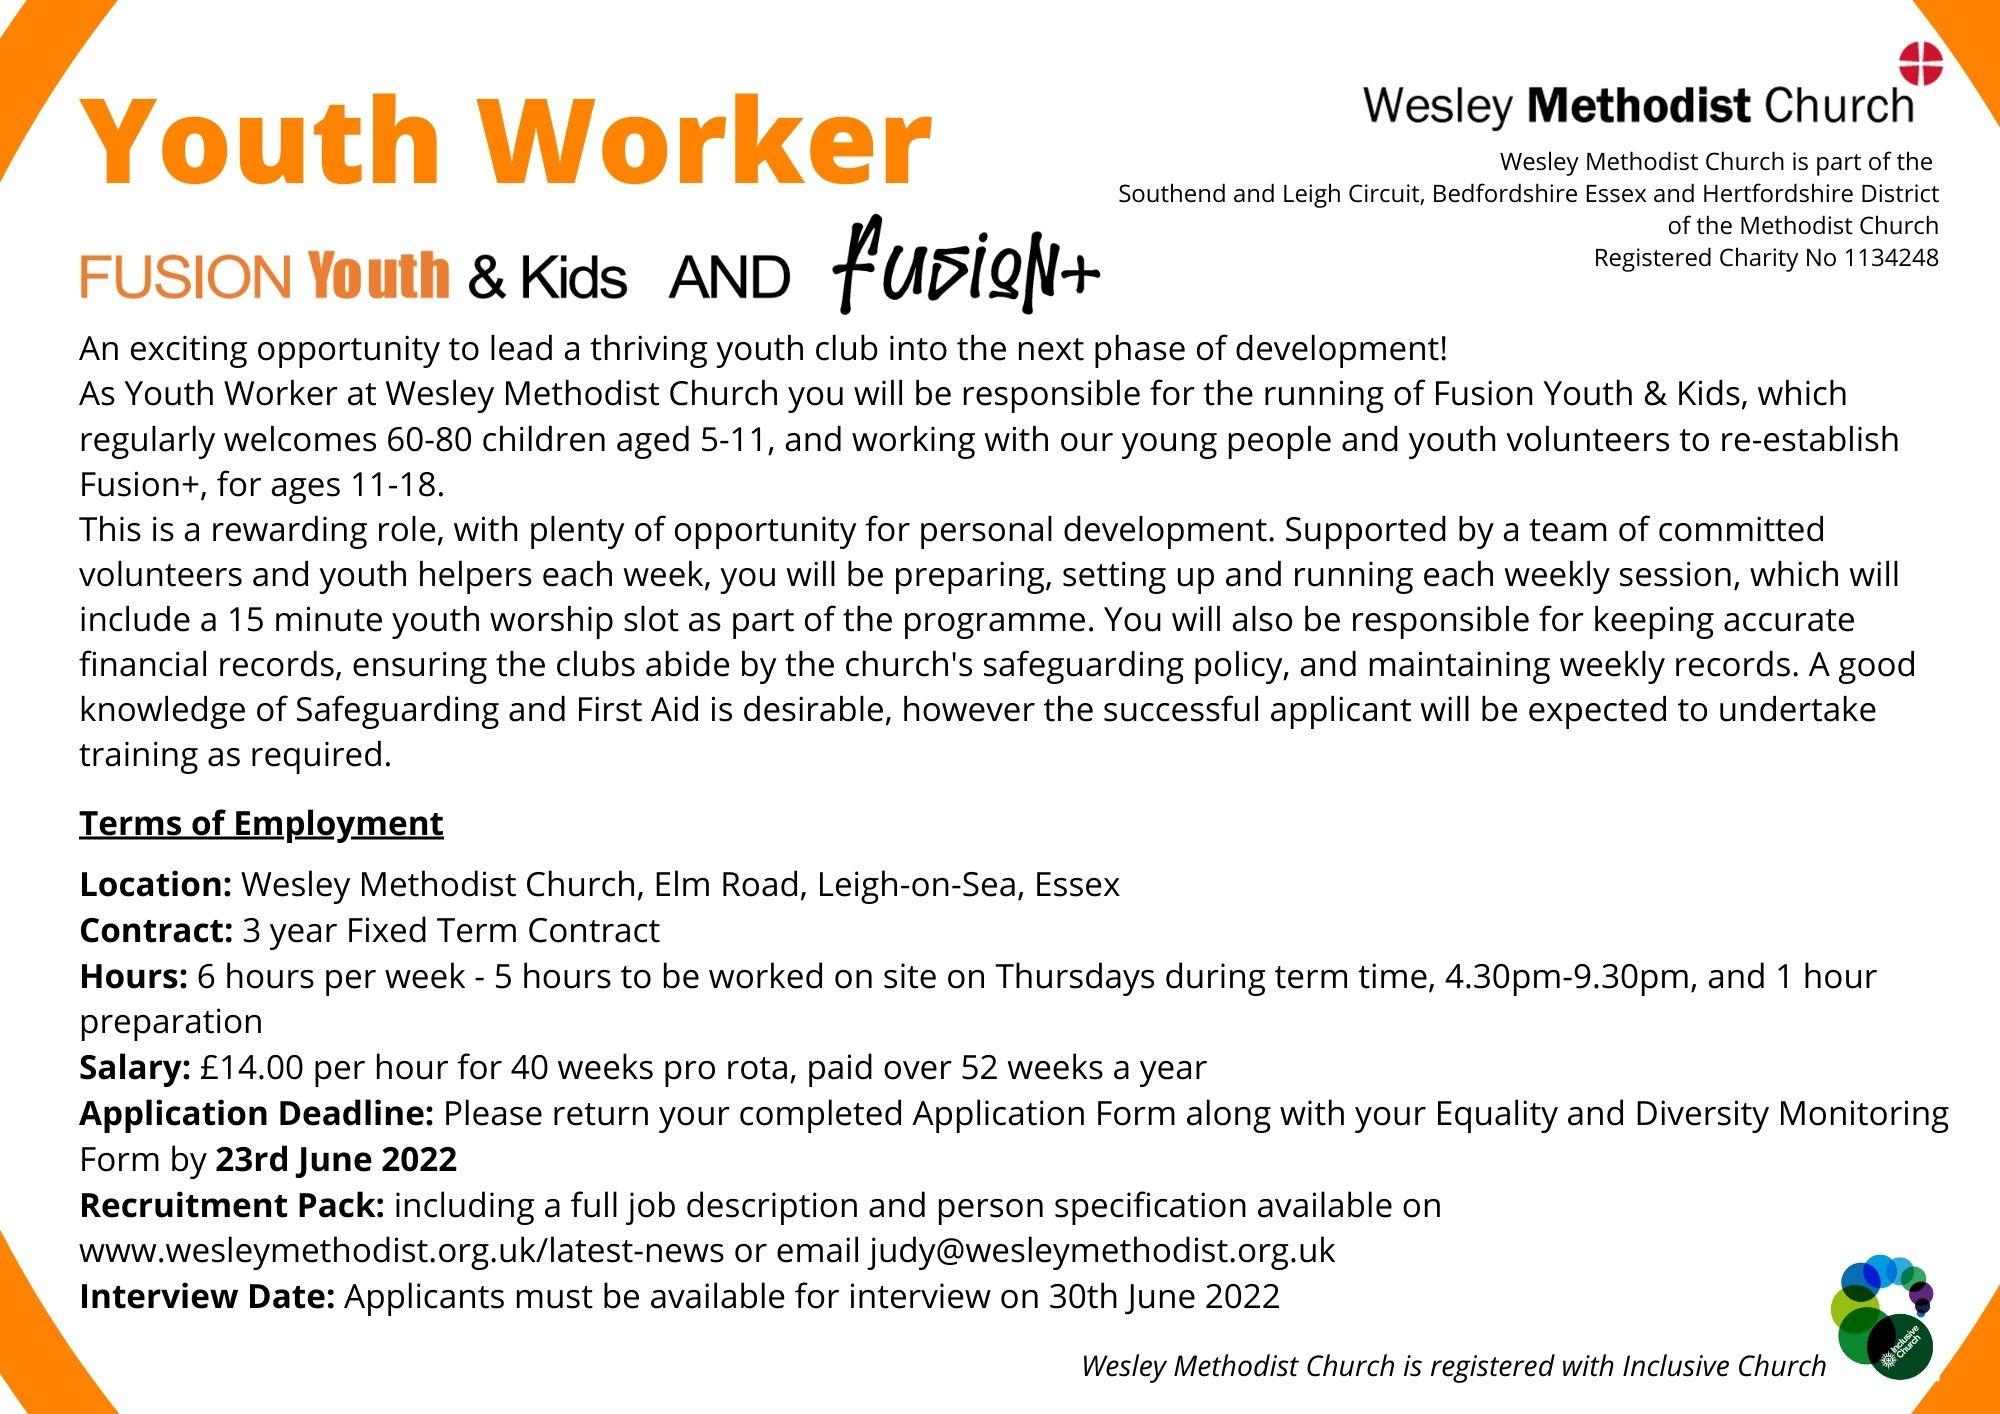 Youth Worker Job Advert